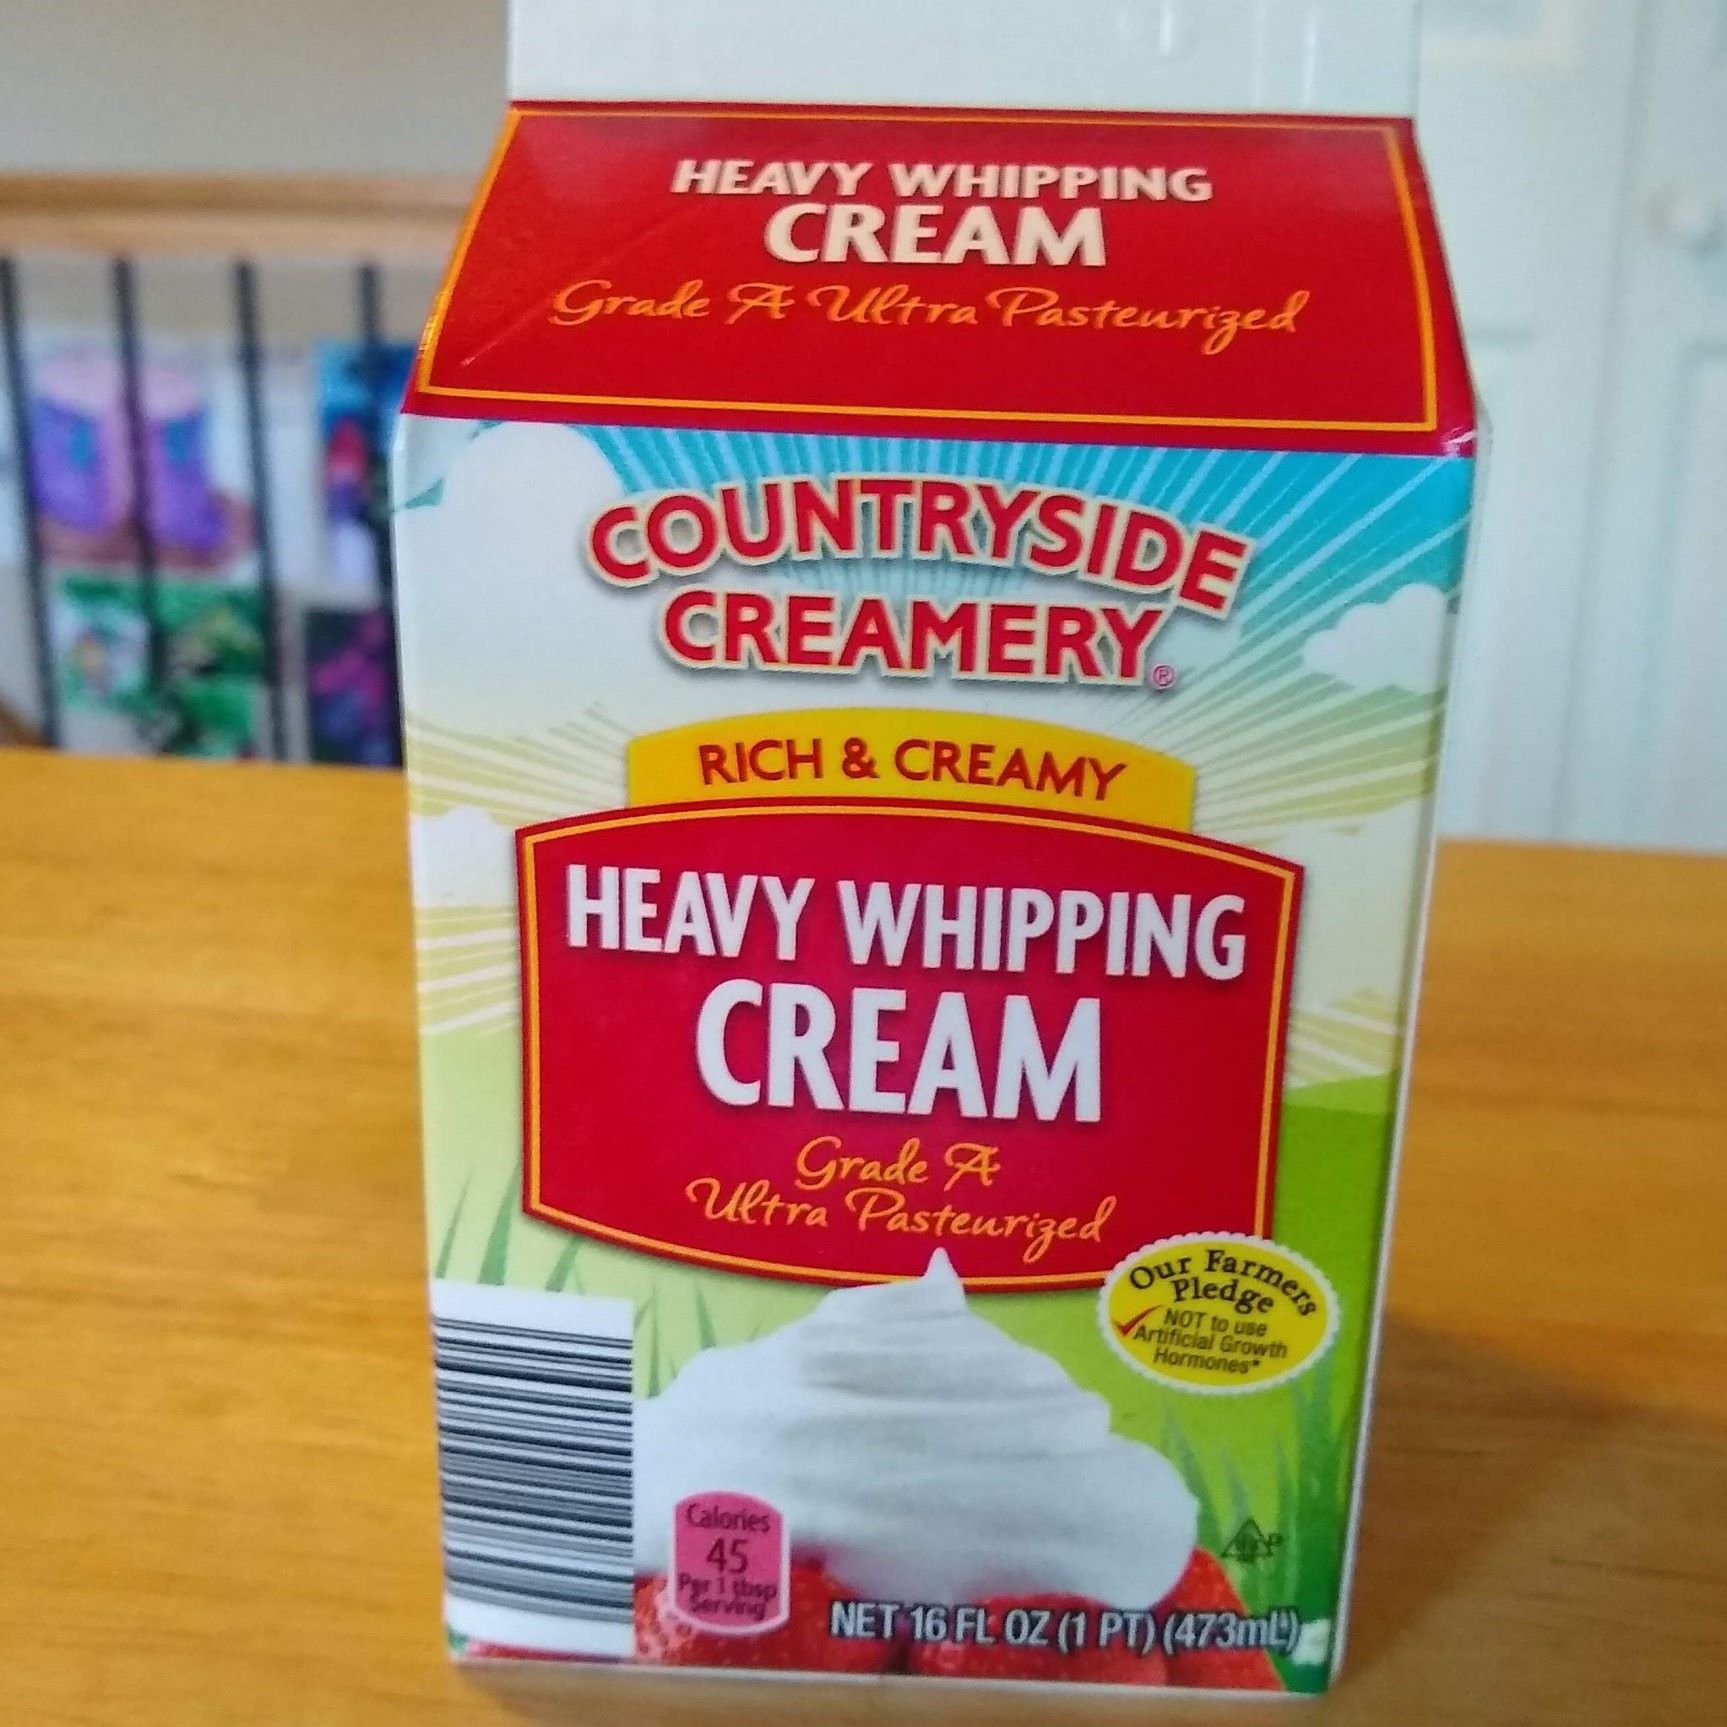 How To Store Heavy Whipping Cream